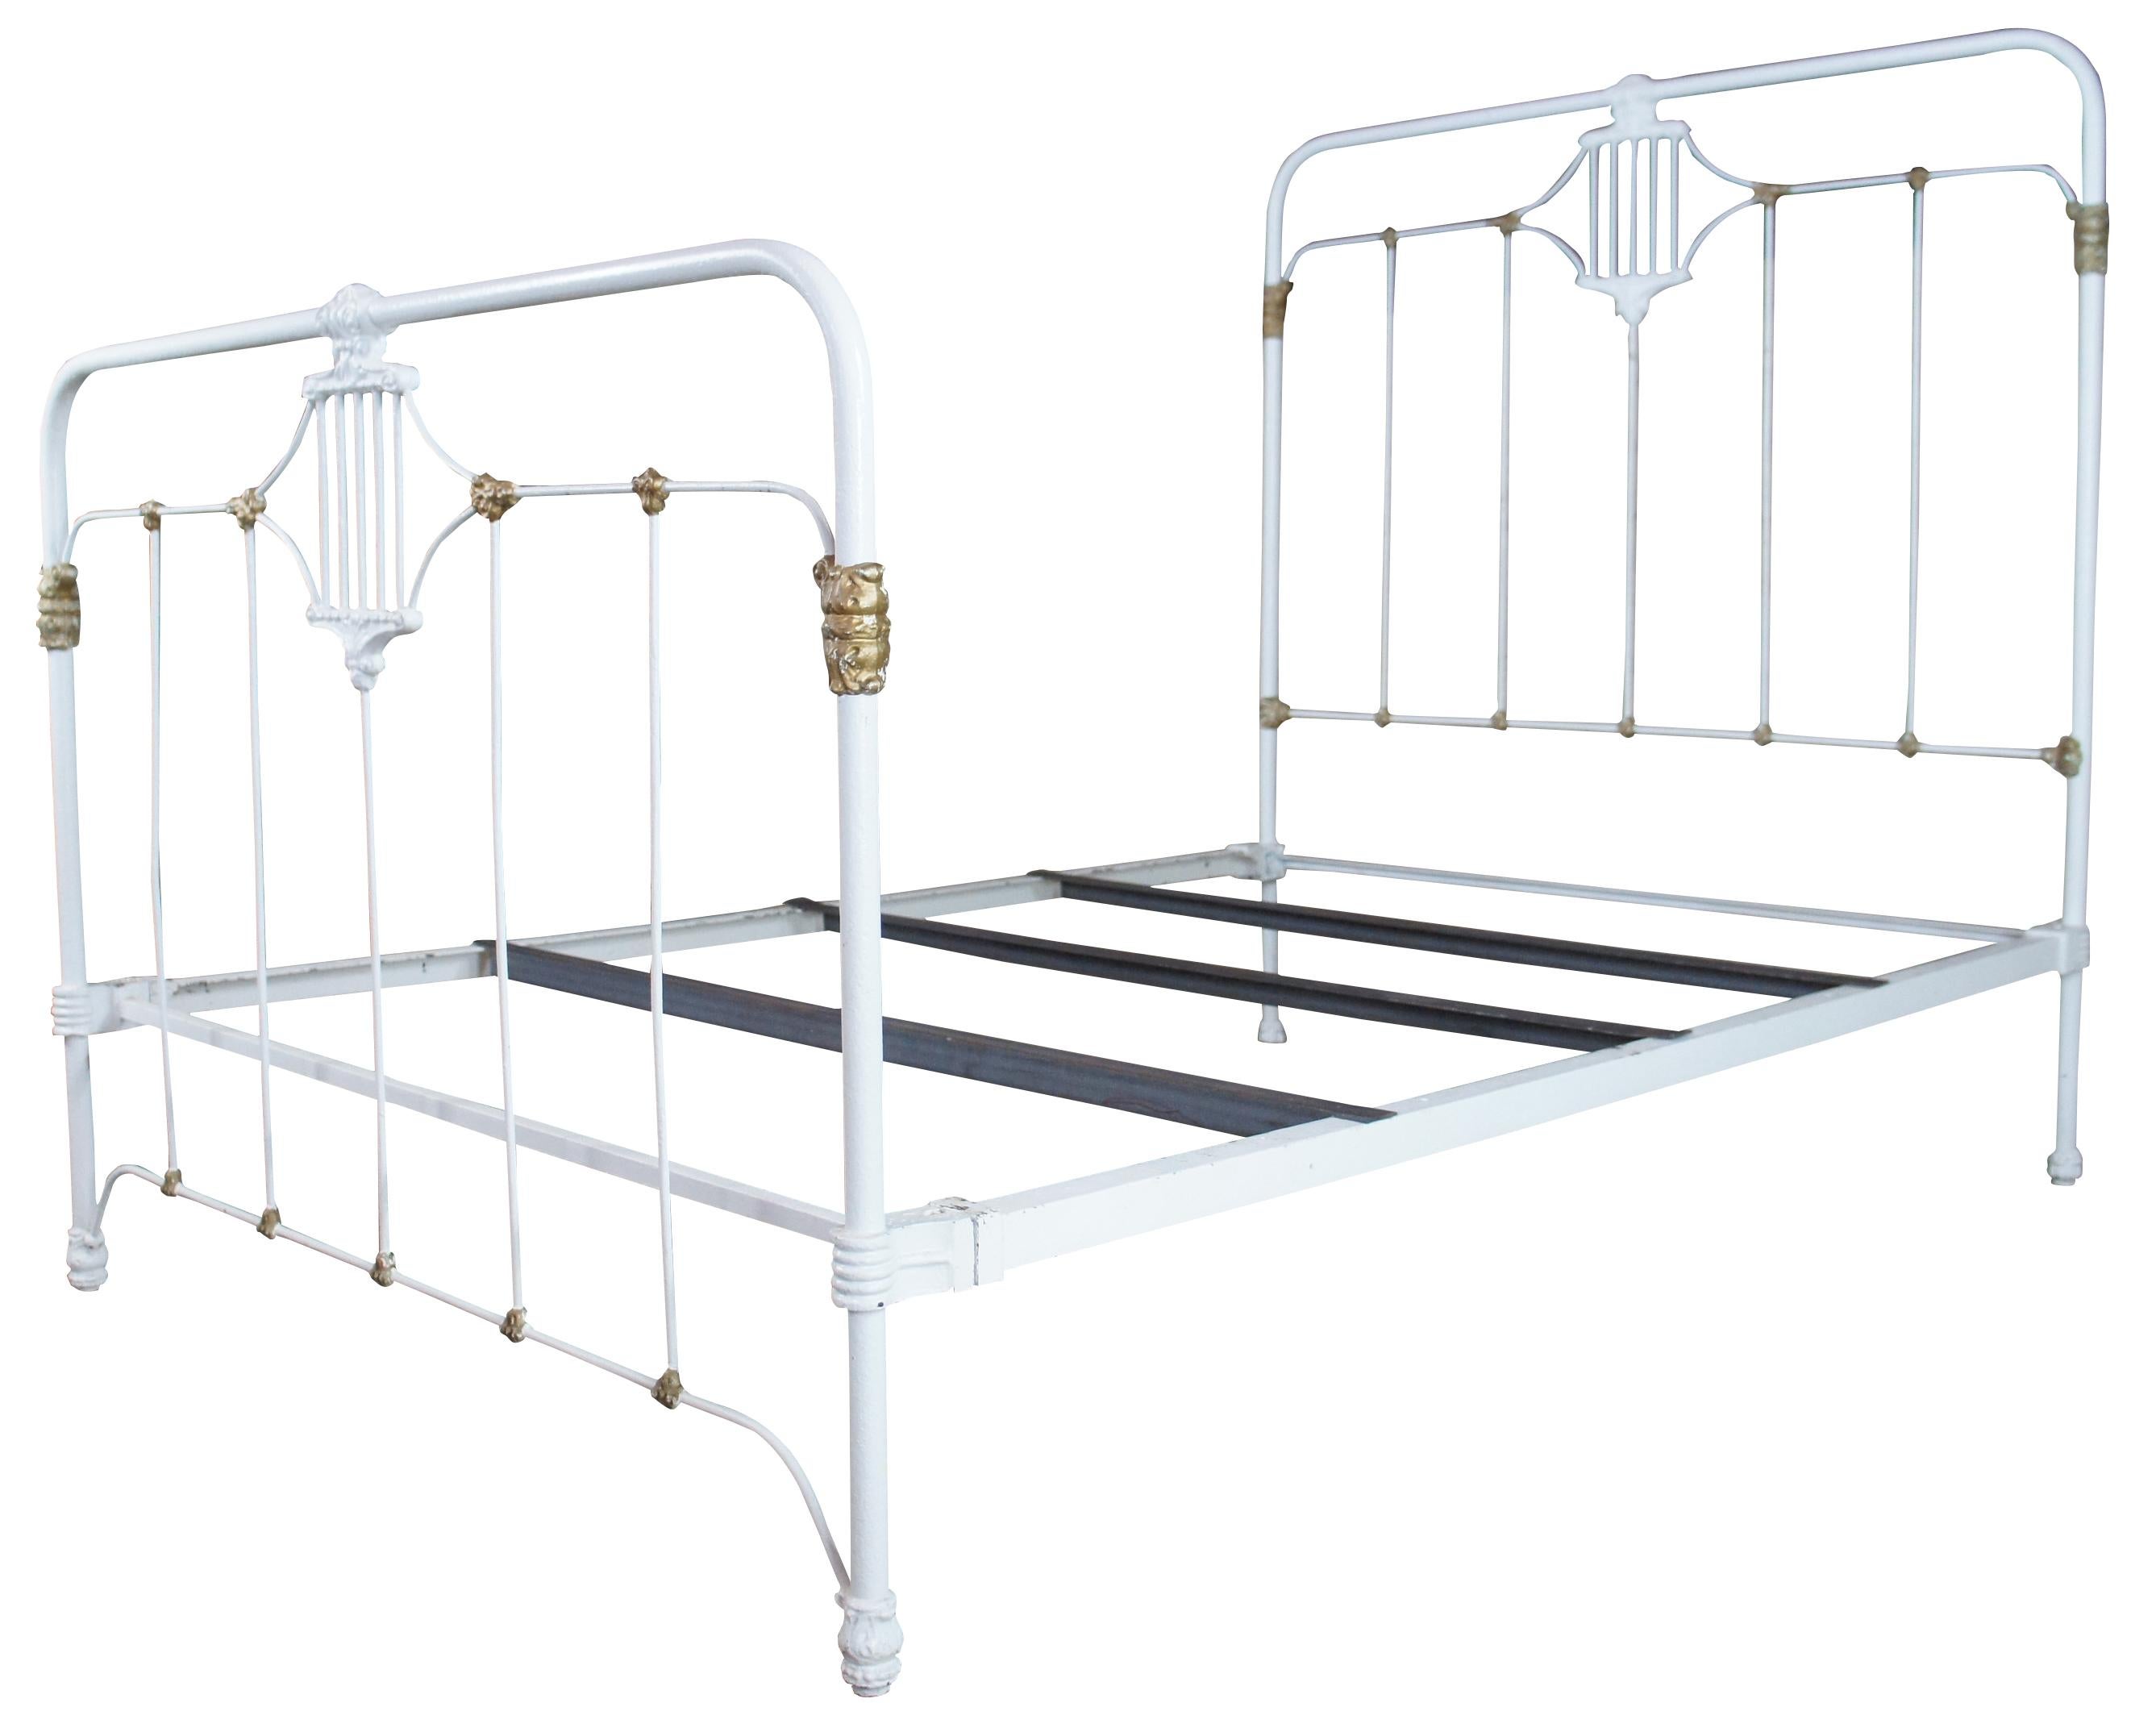 Antique cast iron bed frame. Painted white and gold with French styling.

Foot board height 40.5